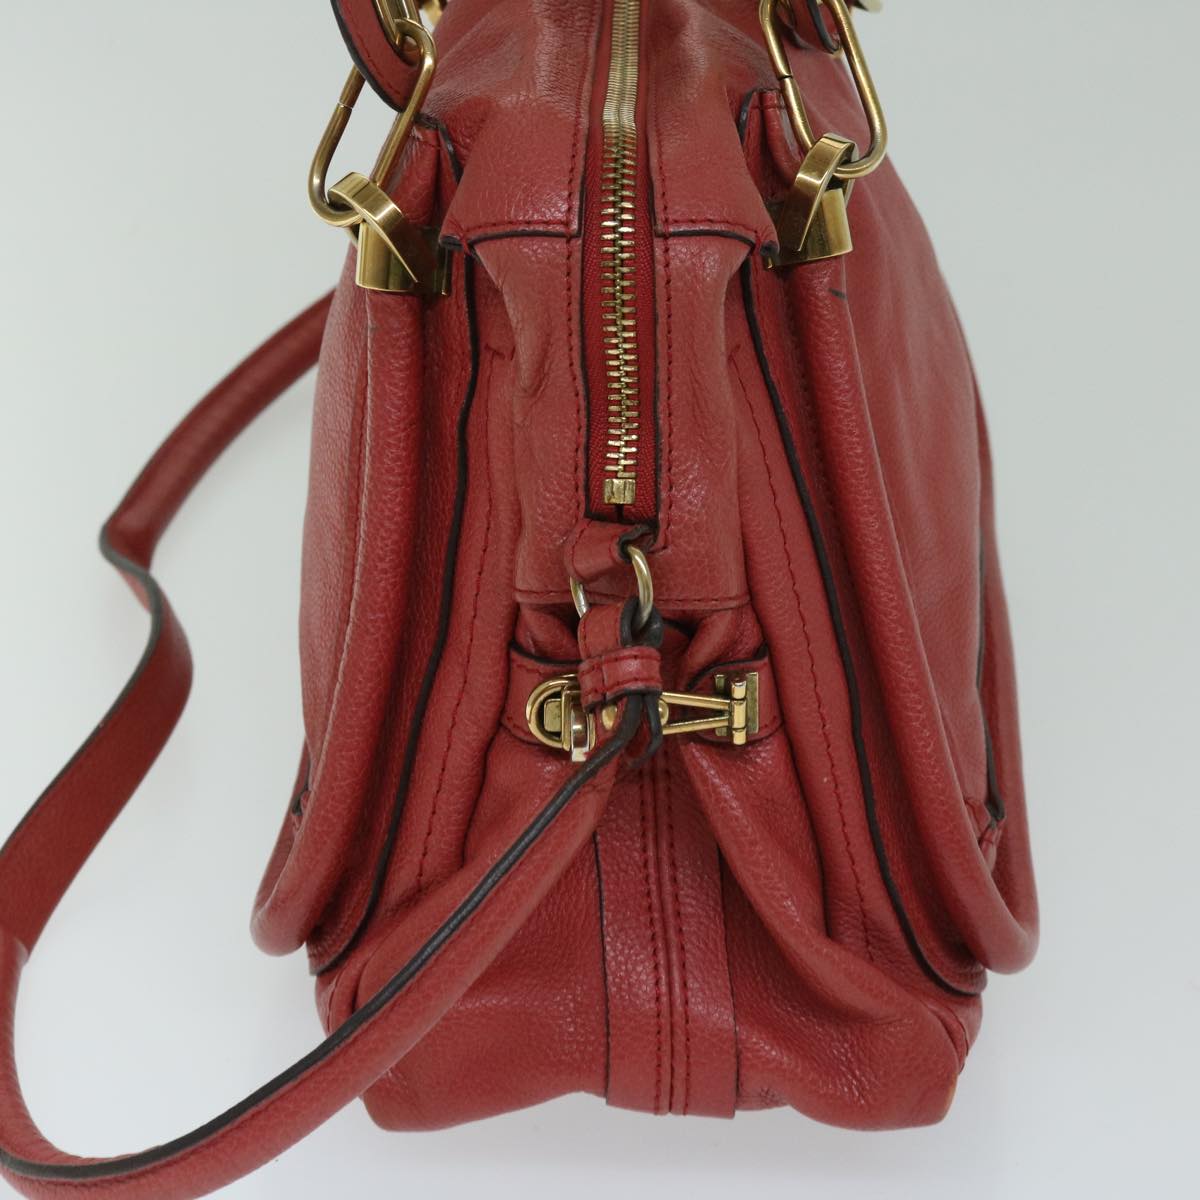 Chloe Paraty Hand Bag Leather Red Auth 67266